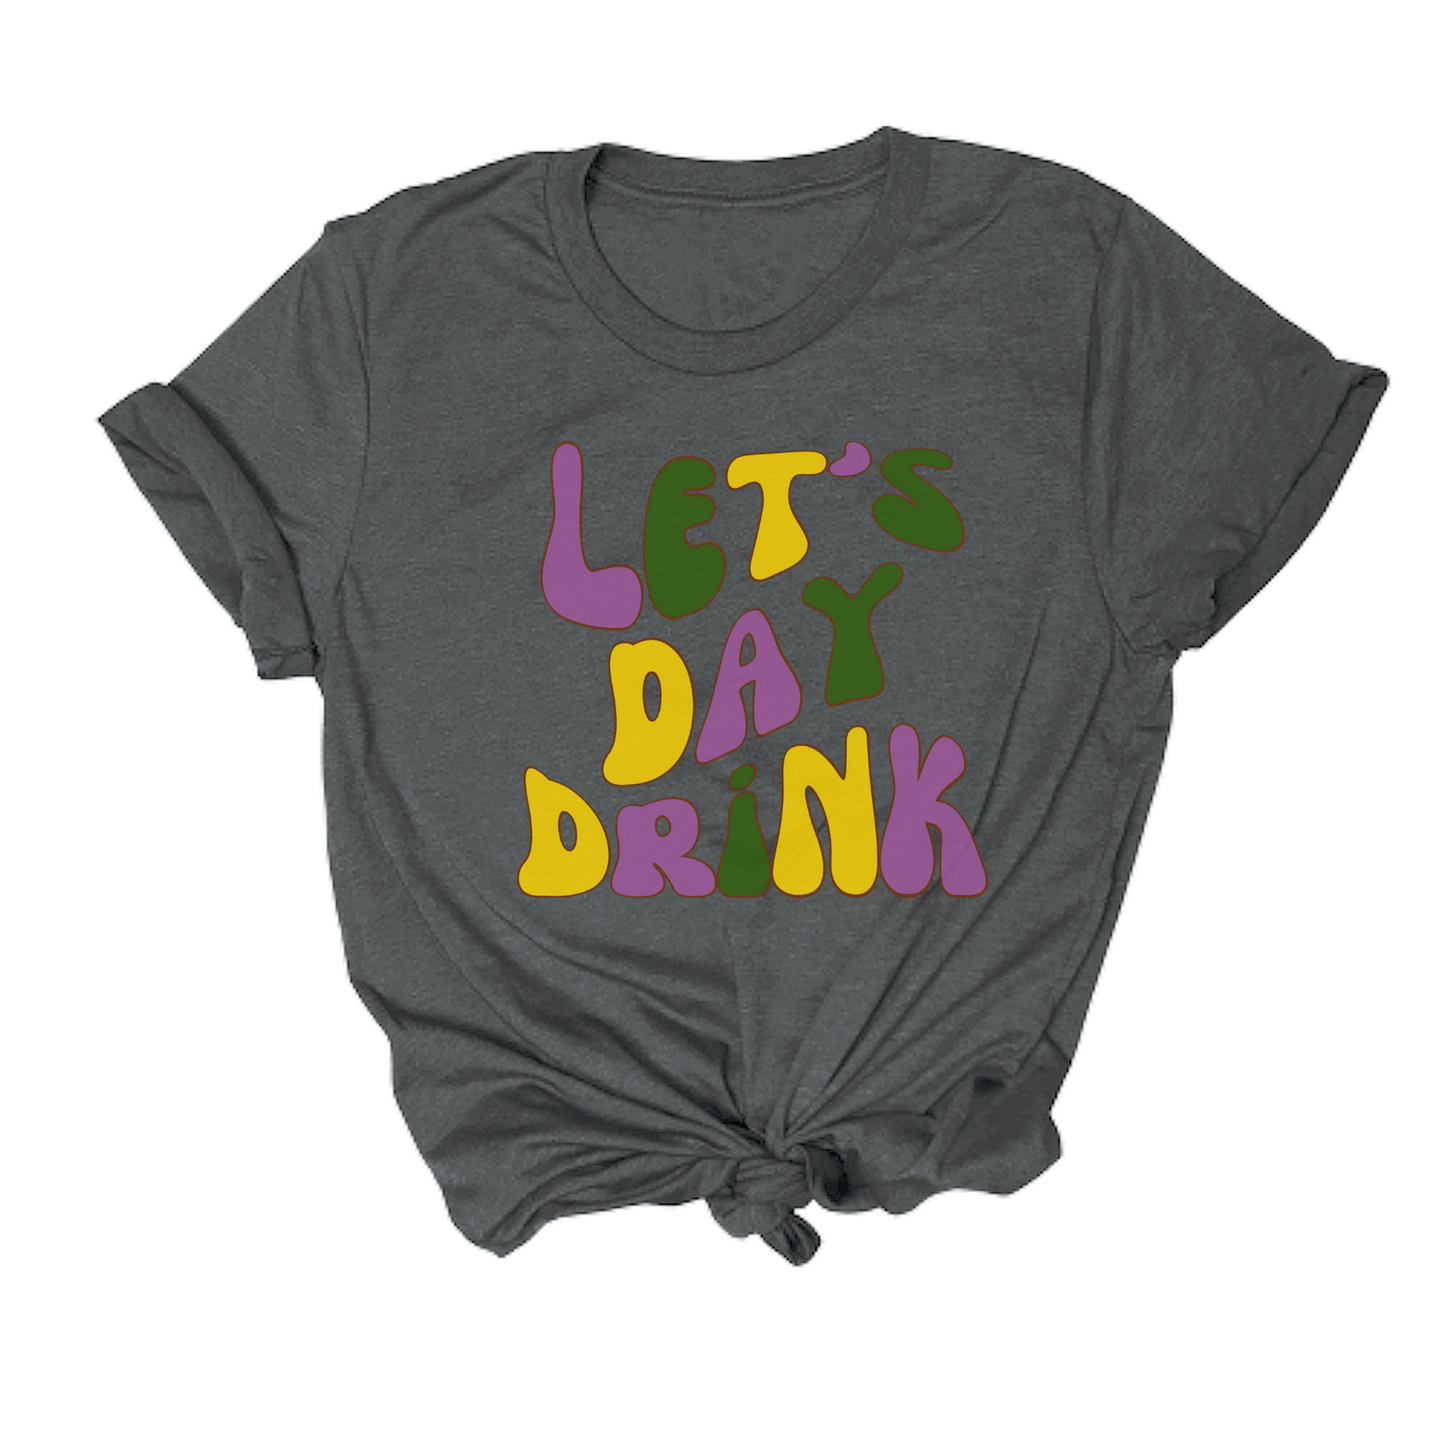 Let's Day Drink Tee